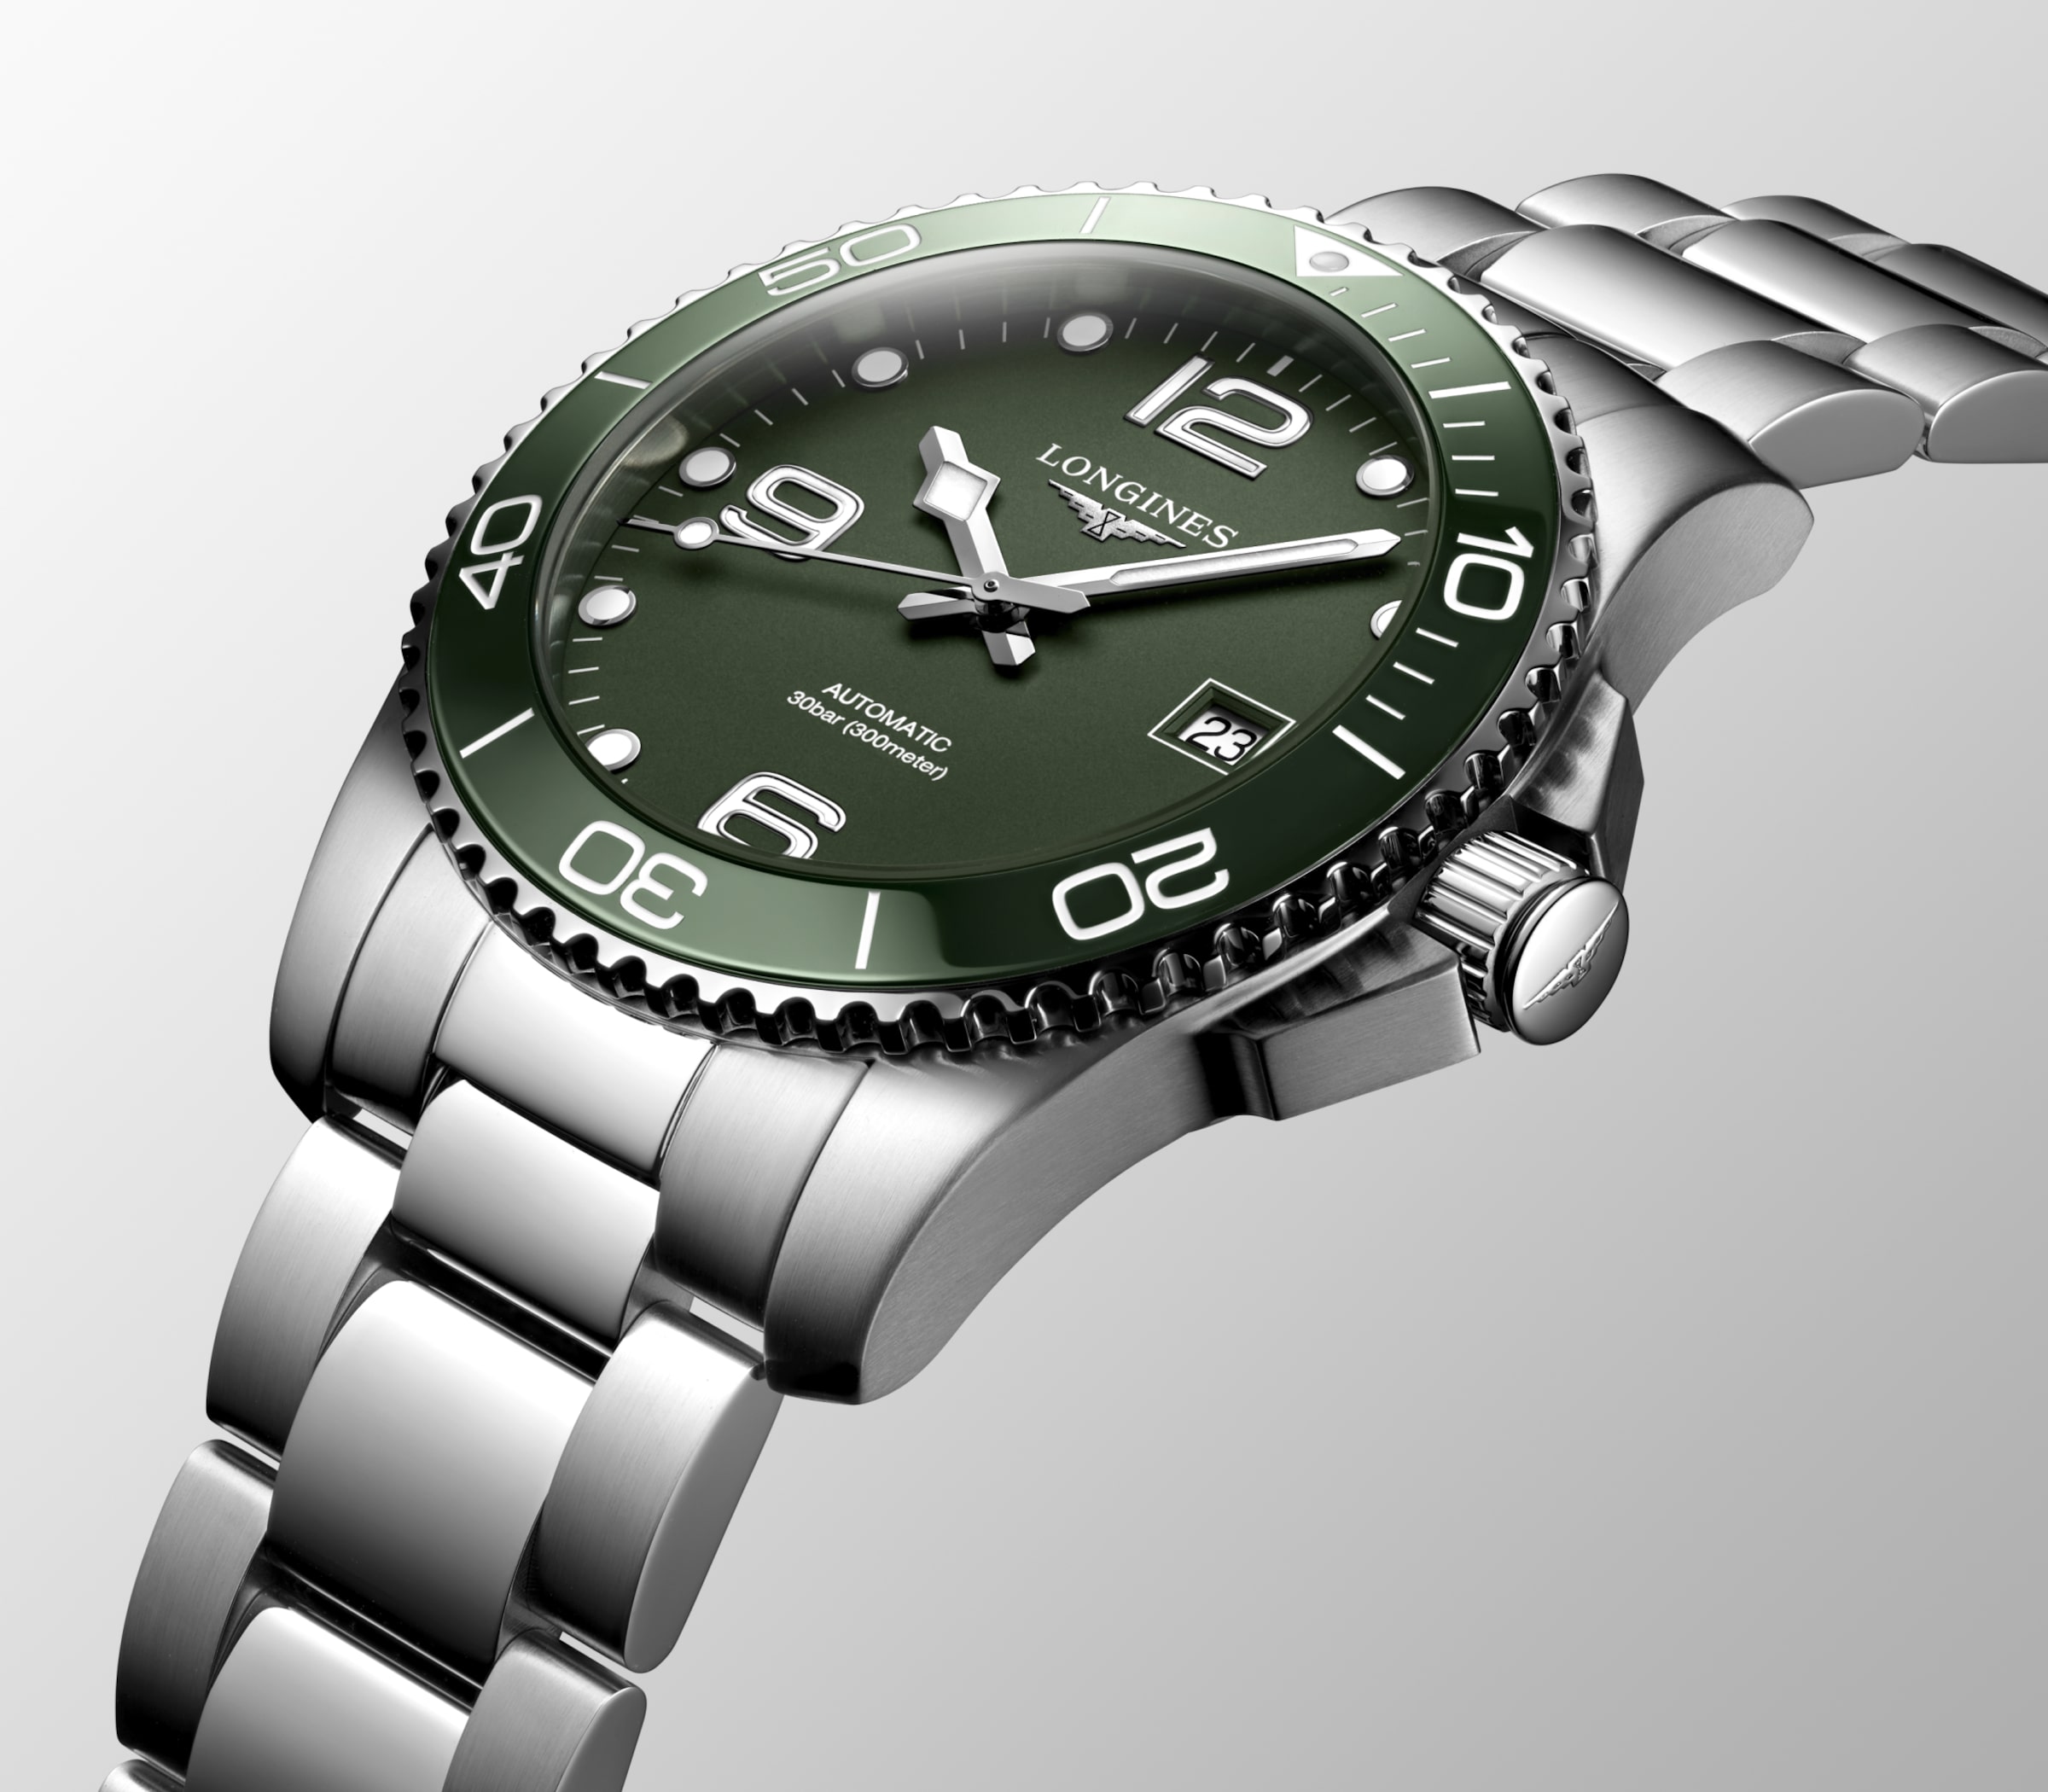 Longines HYDROCONQUEST Automatic Stainless steel and ceramic bezel Watch - L3.781.4.06.6